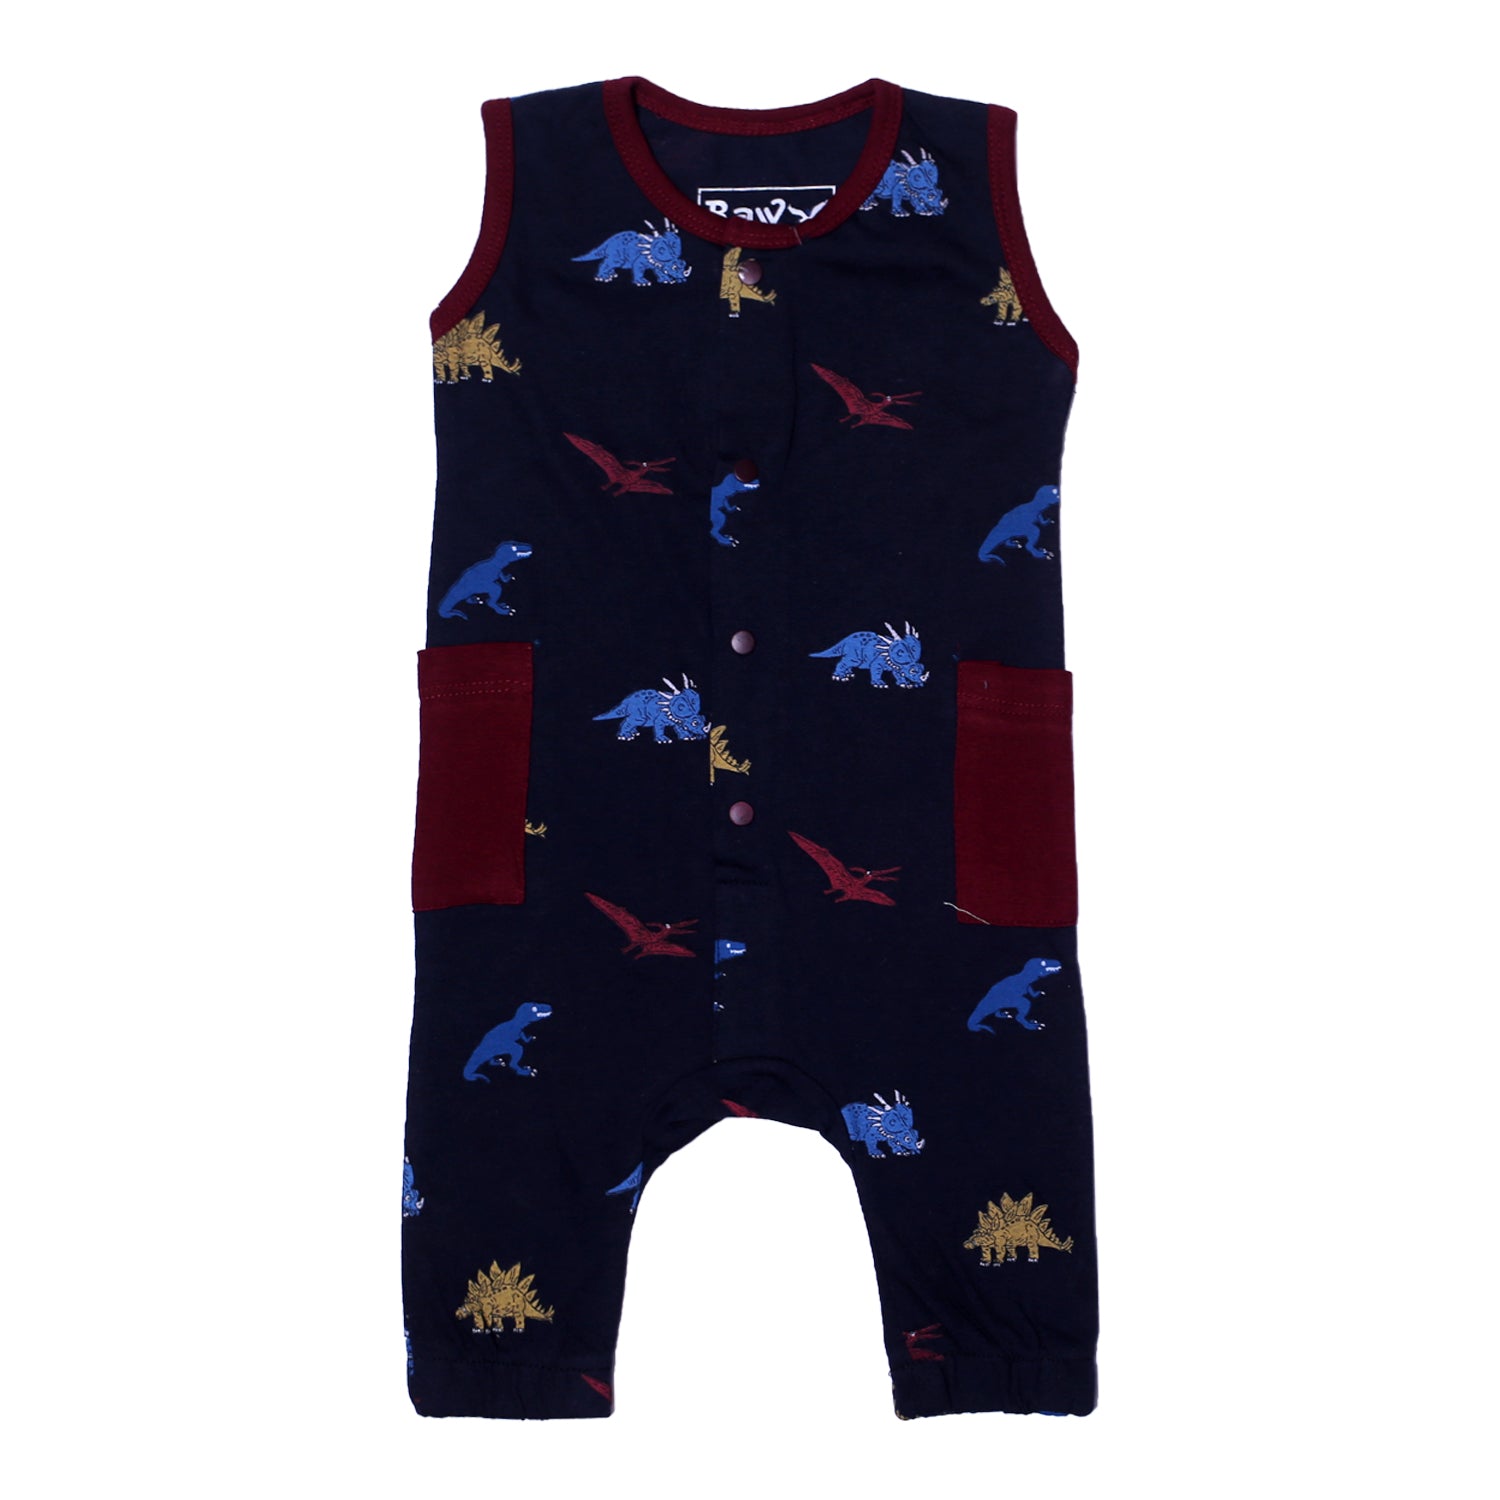 NAVY BLUE FULL BODY SLEEVE LESS DINO PRINTED WITH MAROON POCKETS ROMPER